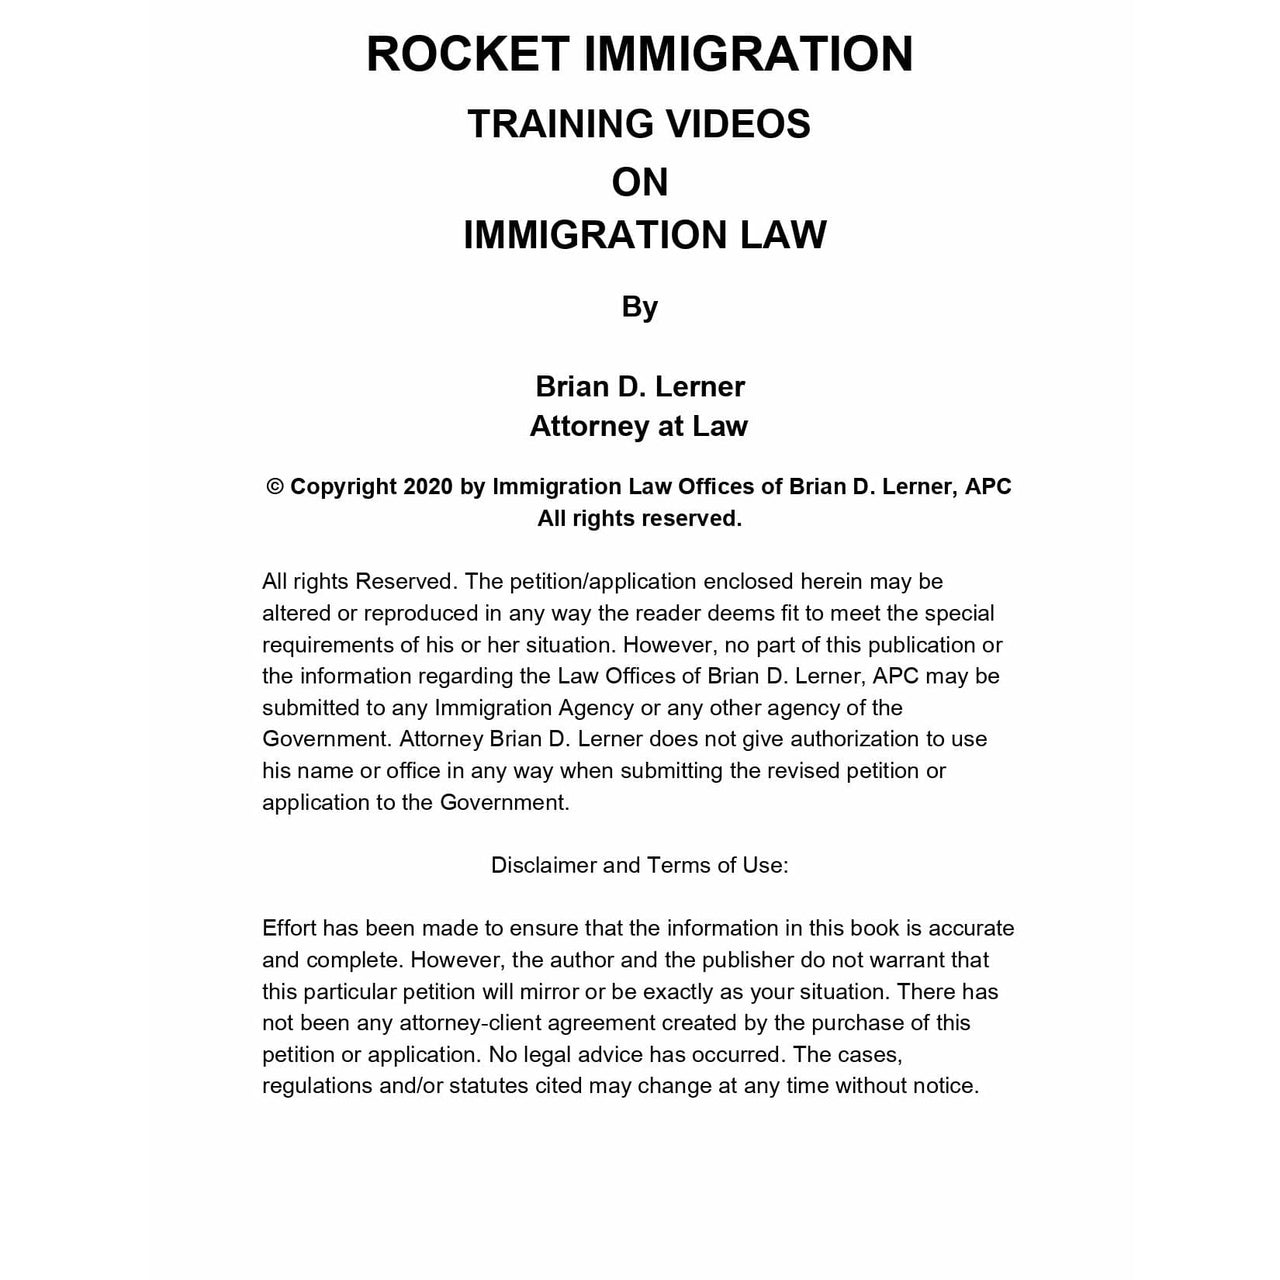 E-2 Treaty Investor Business Visa Training Course Access Packet - Rocket Immigration Petitions